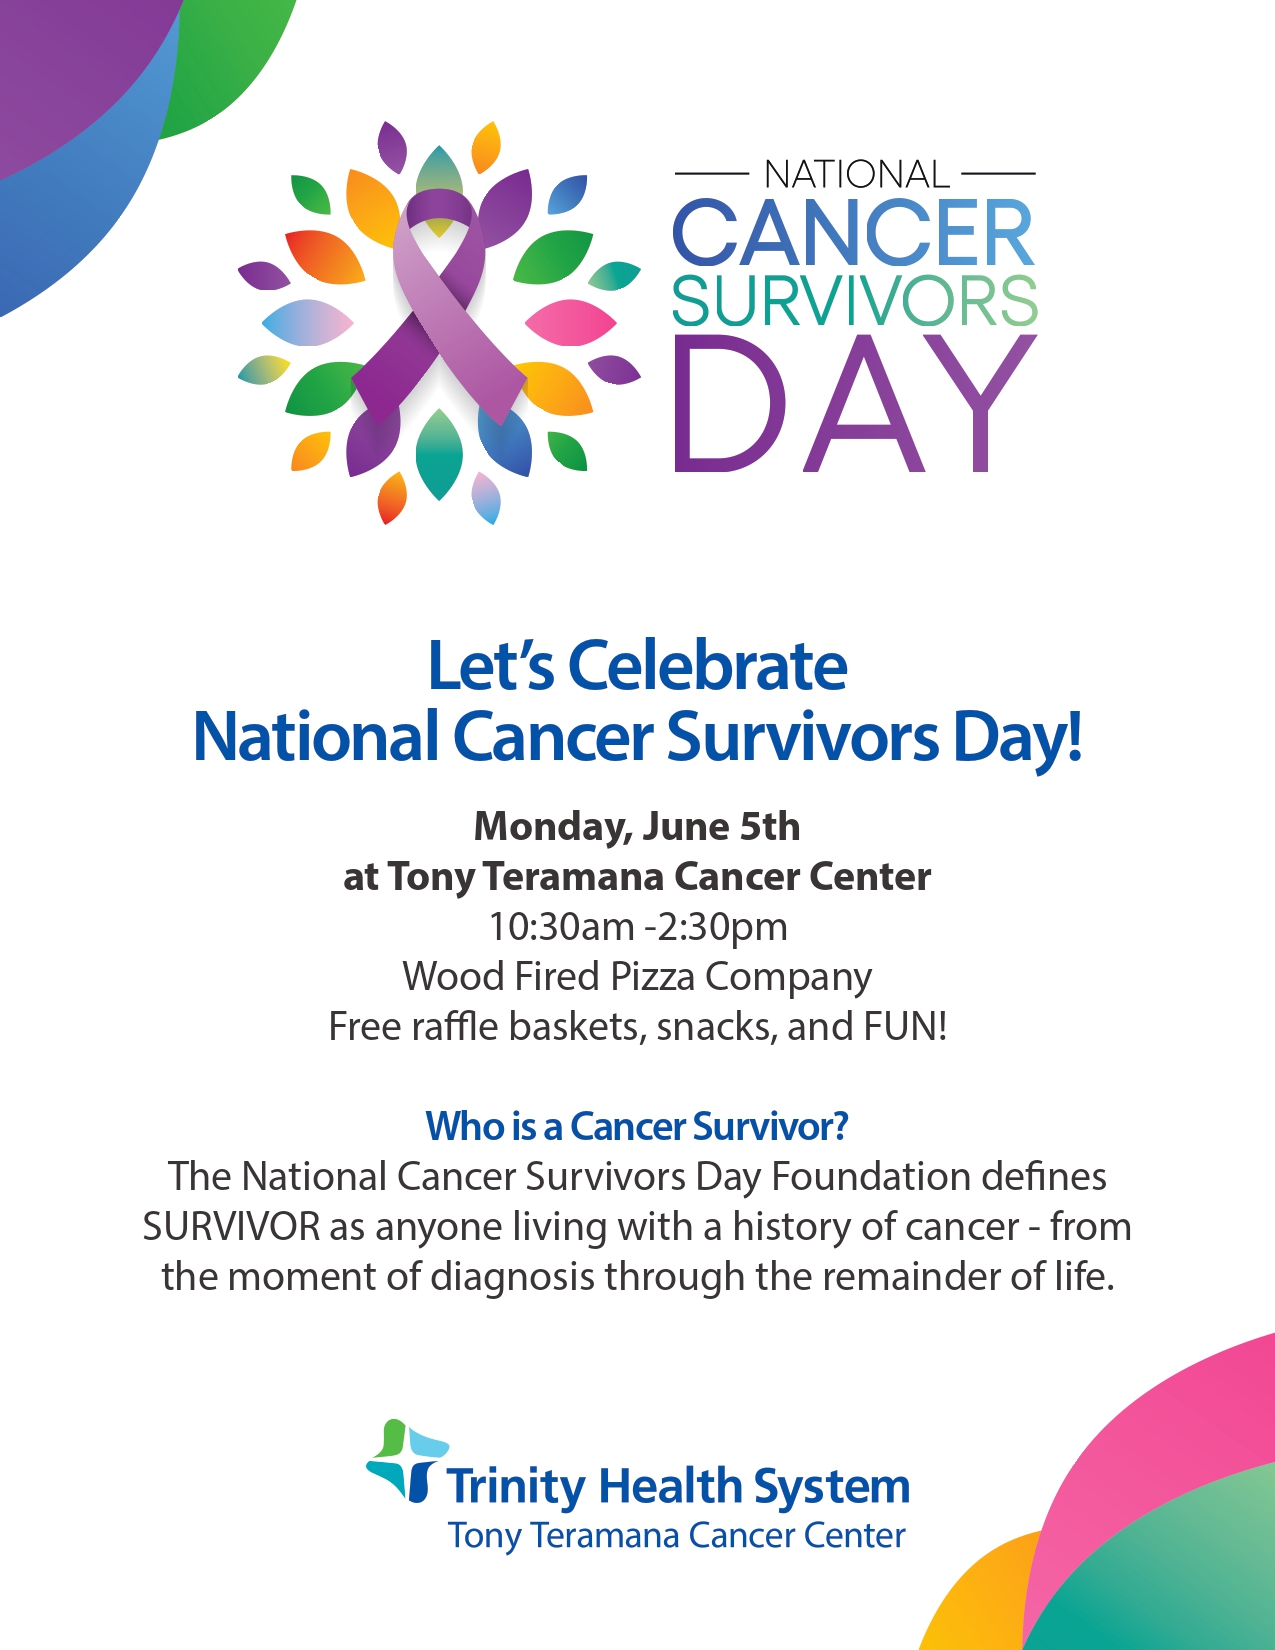 Let's Celebrate National Cancer Survivors Day! - Trinity Health System